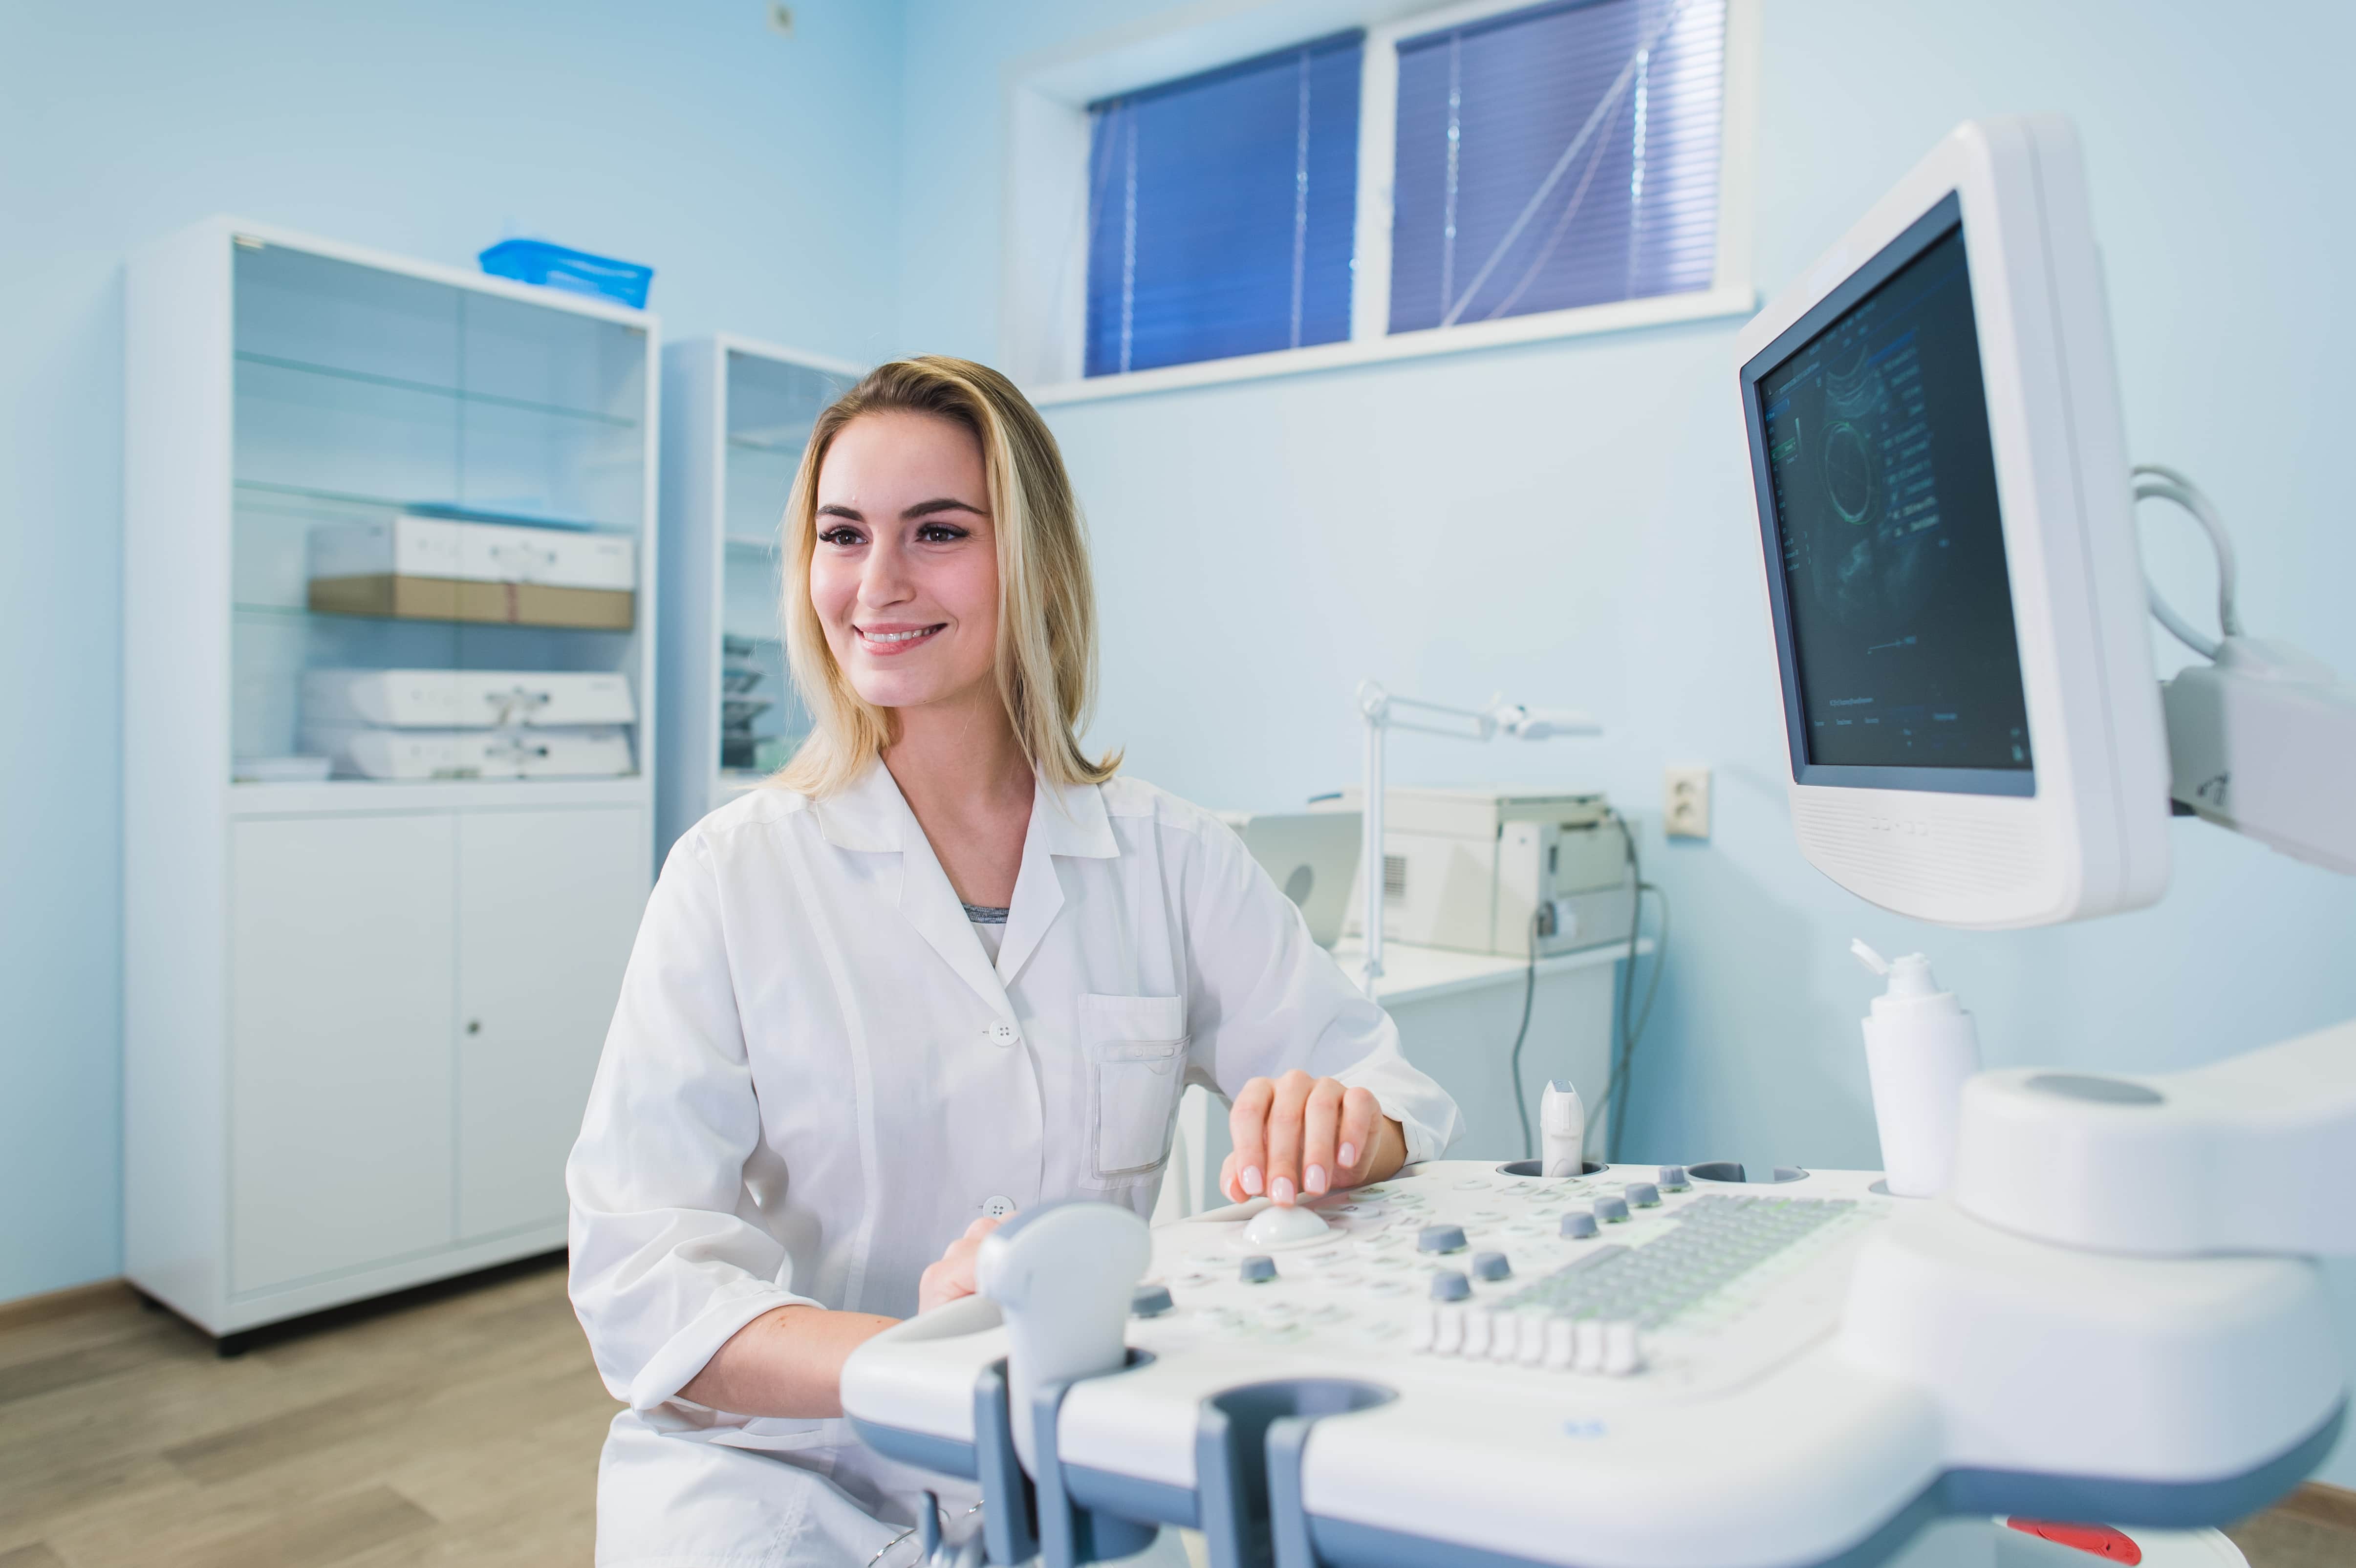 CHECKLIST FOR YOUR UPCOMING DENTAL APPOINTMENT